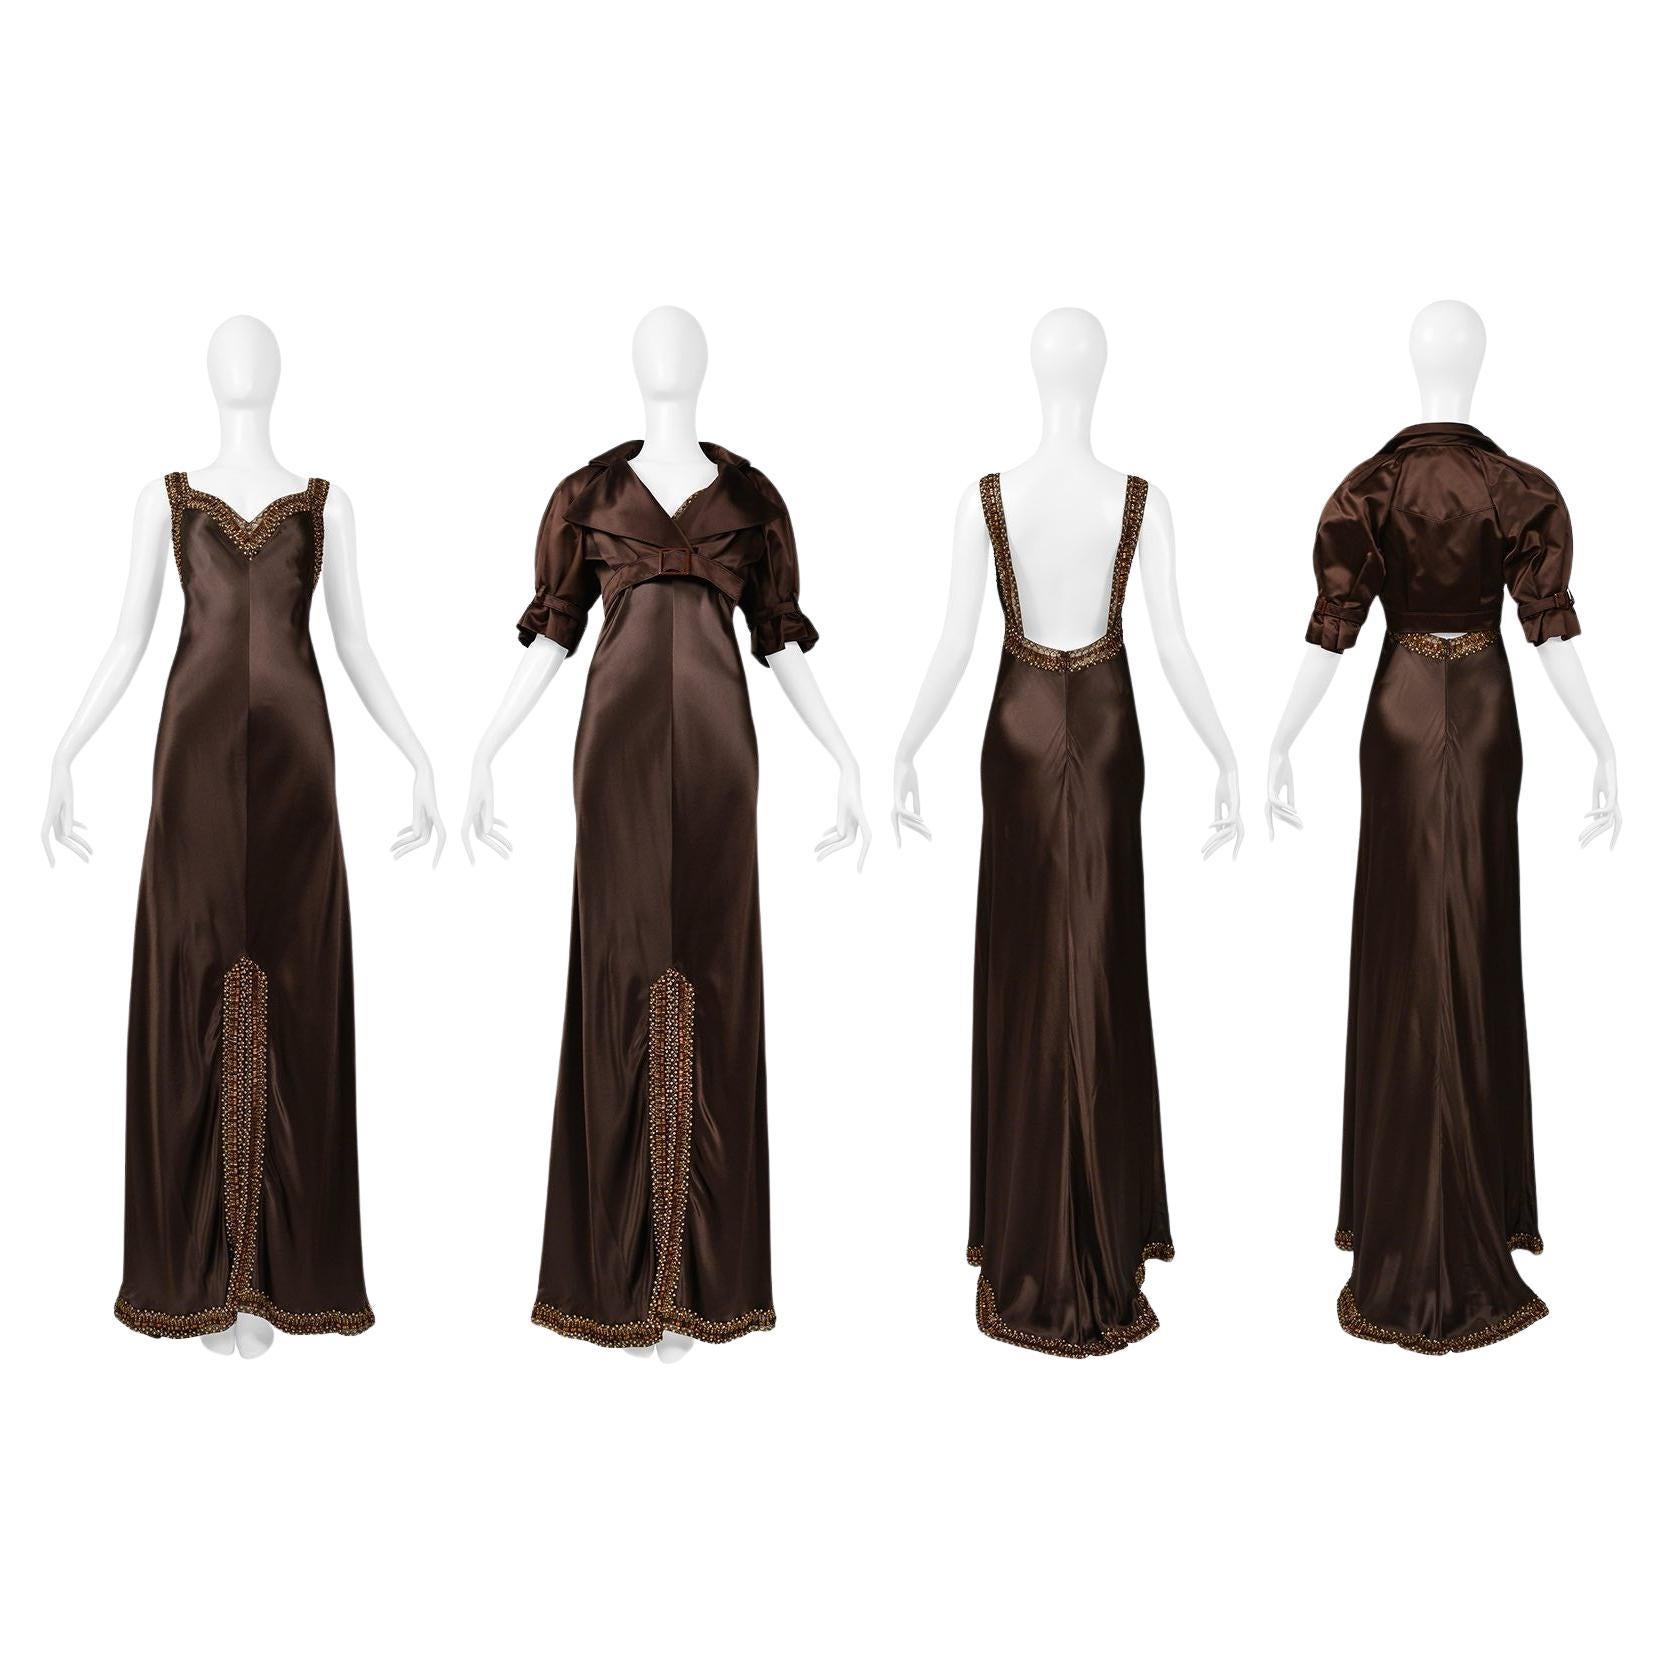 Resurrection Vintage is excited to offer a vintage Valentino brown silk gown and jacket ensemble. Gown features dramatic evening gown length, sexy low exposed back, thick row of gold and bronze beading on straps and outlining of edges, and above the